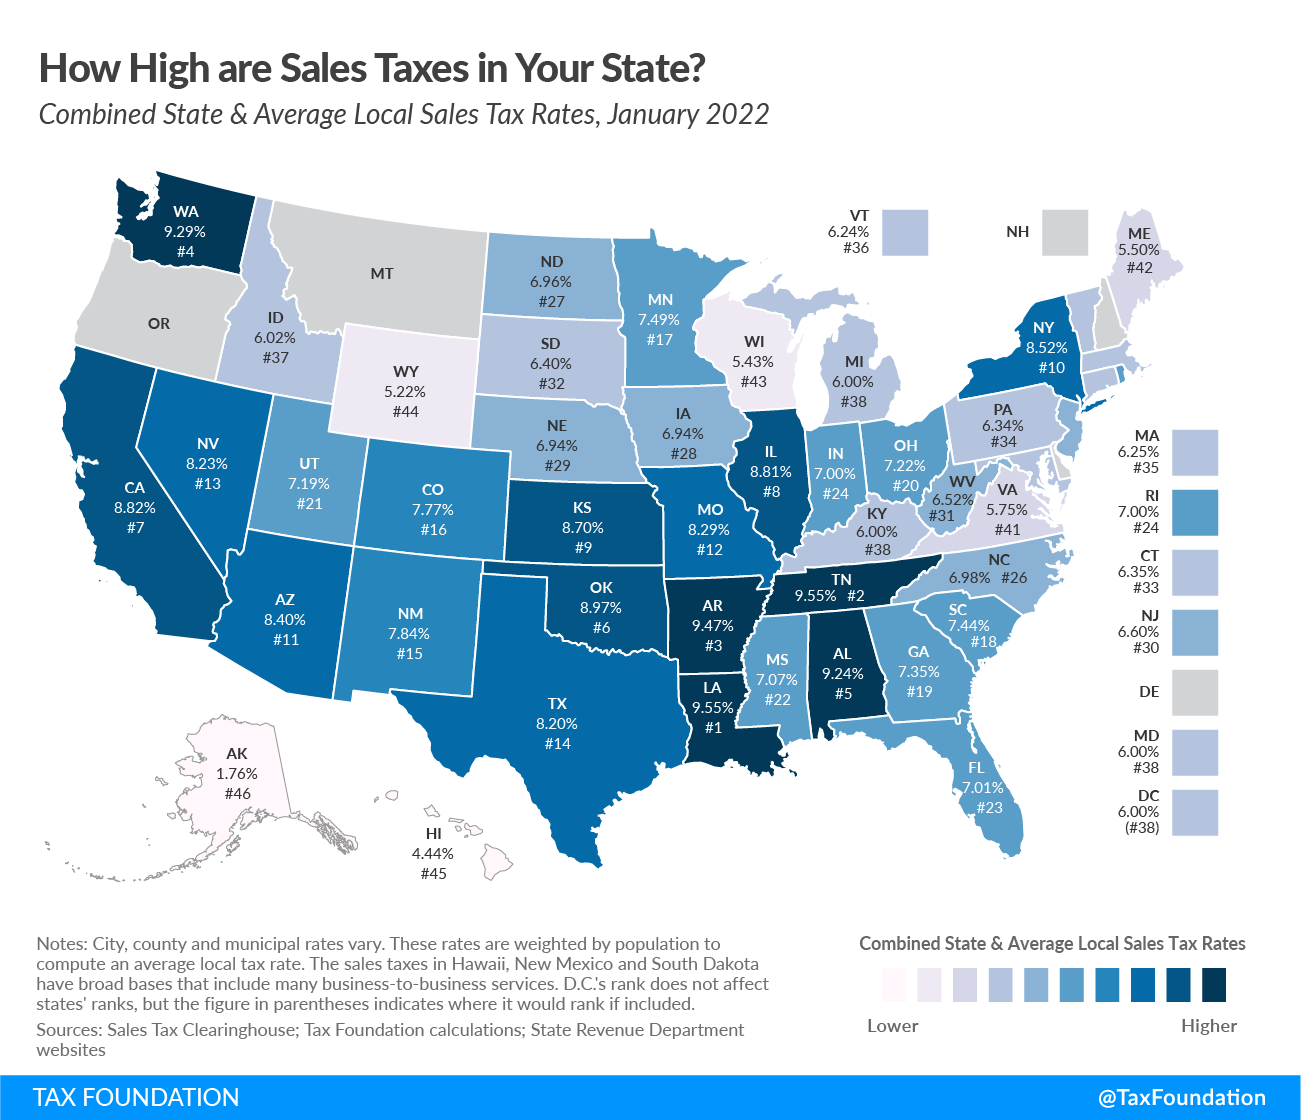 Tax Foundation’s 2022 heatmap of sales tax rates in different US states